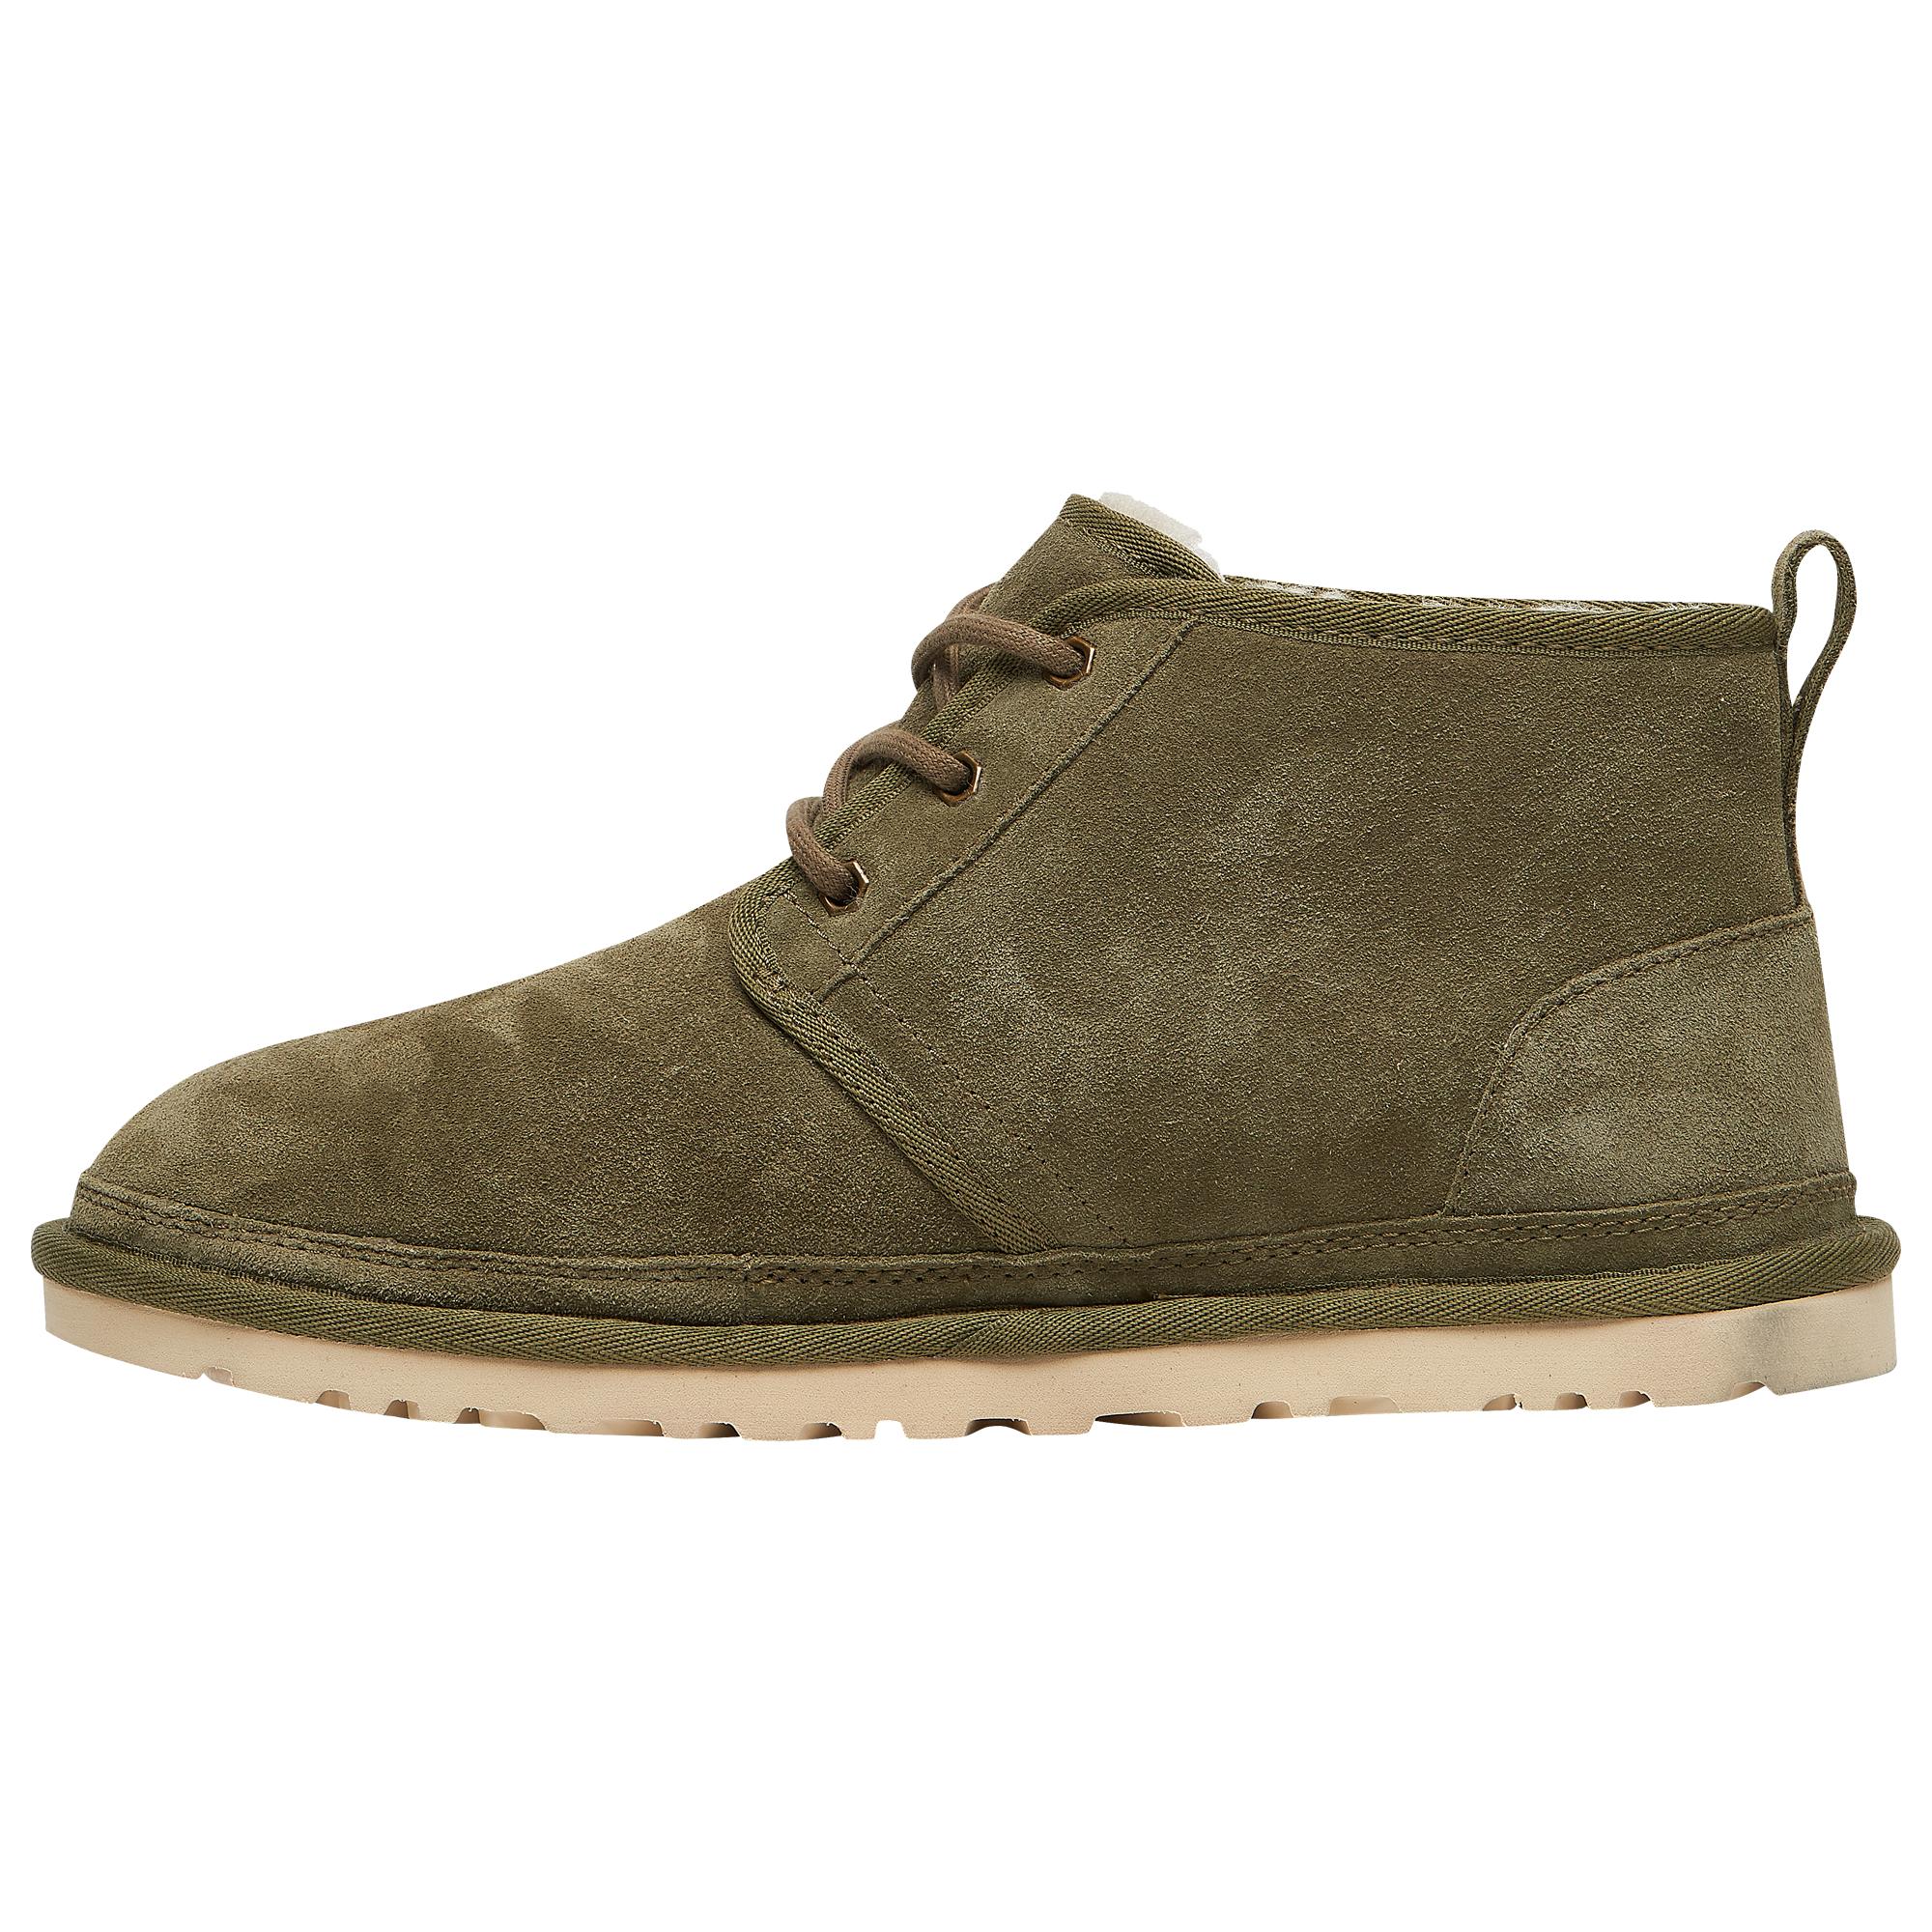 UGG Leather Neumel Outdoor Boots in Moss Green (Green) for Men - Lyst